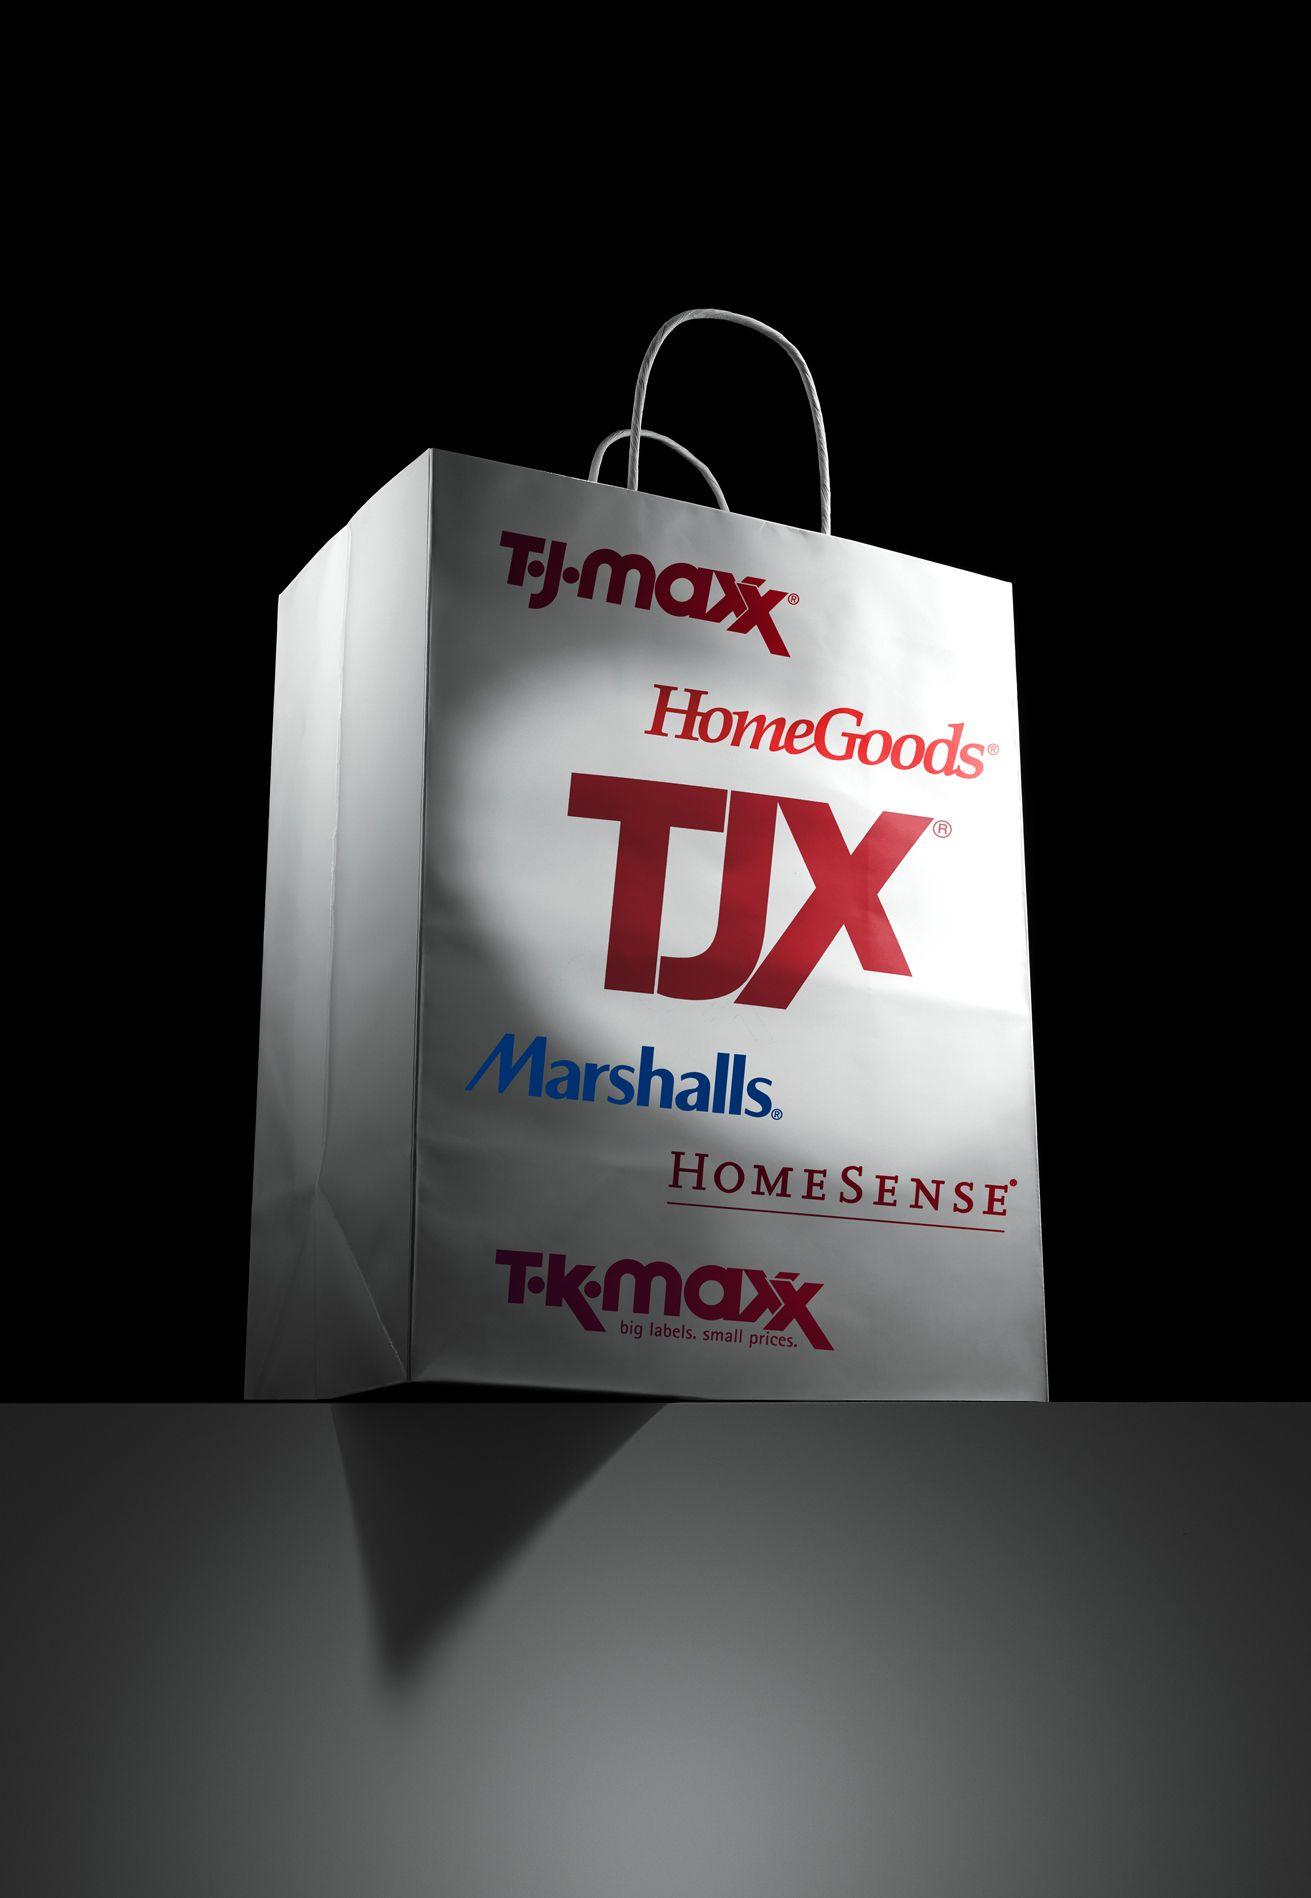 TJ Maxx Logo - Is T.J. Maxx the best retail store in the land?